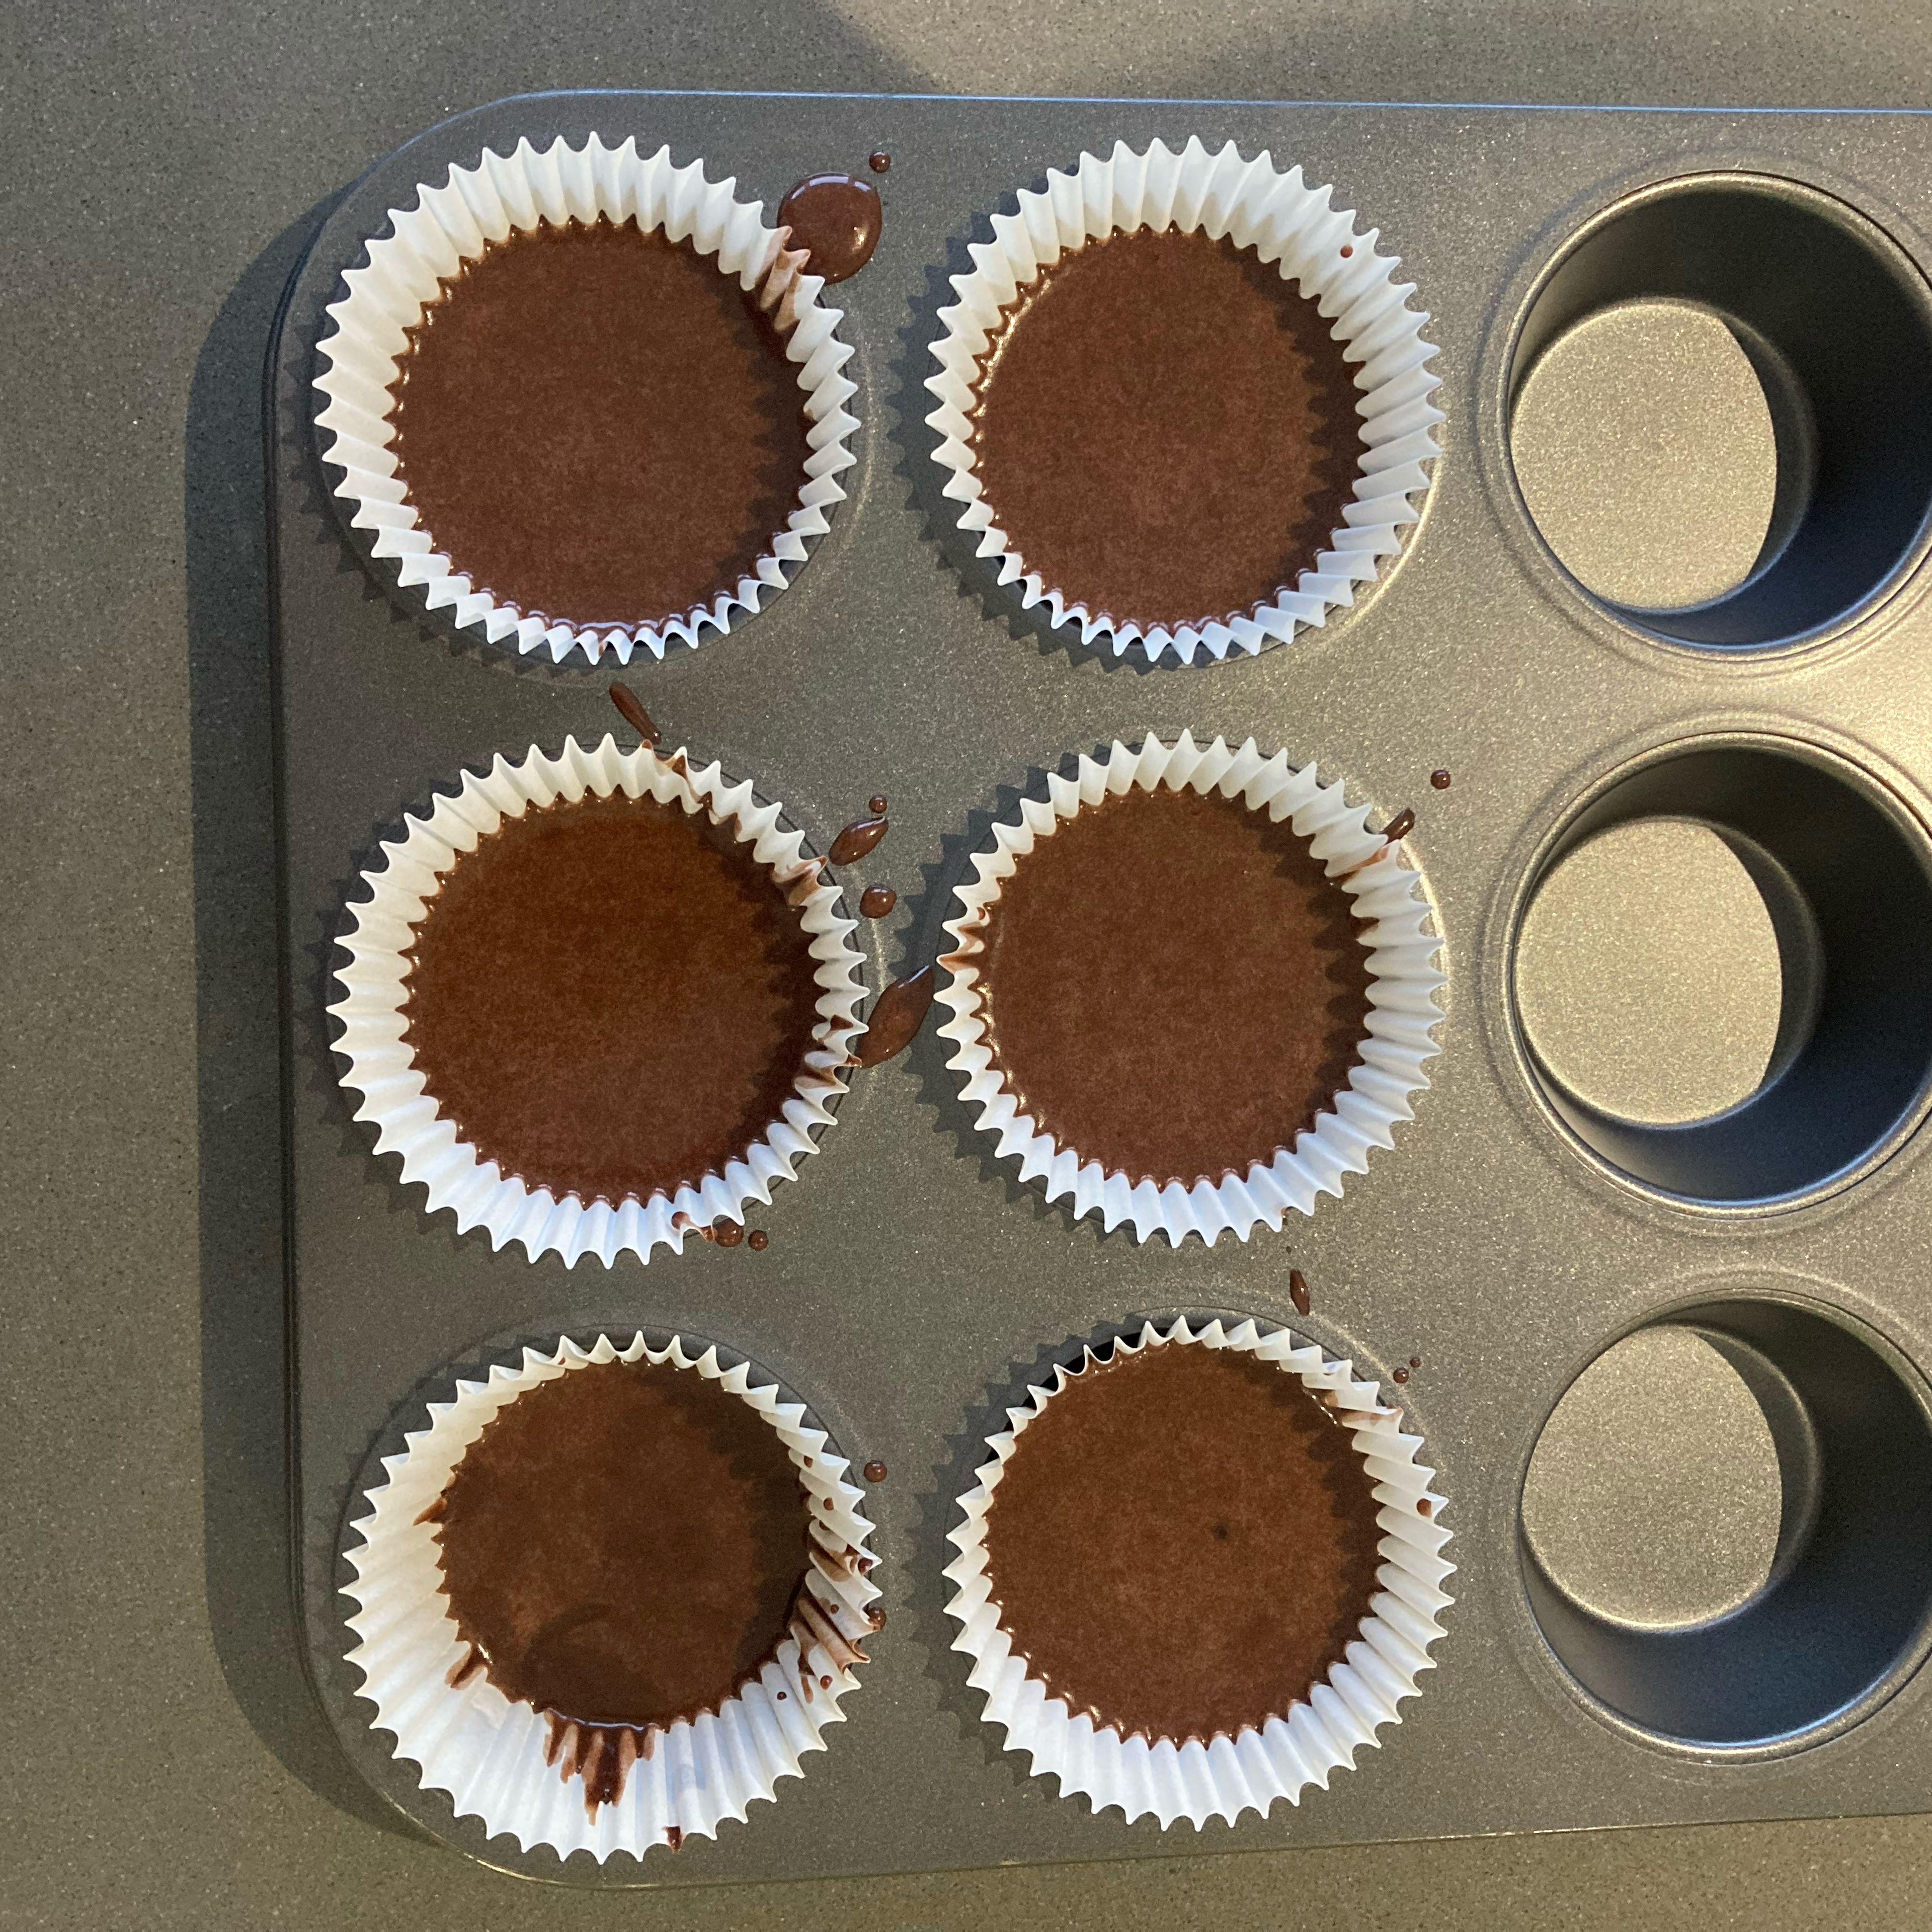 Fill cups to half by the mixture and bake for 12 min. Your cupcakes are ready then. You can add frosting, chocolate or eat them plain, all good.